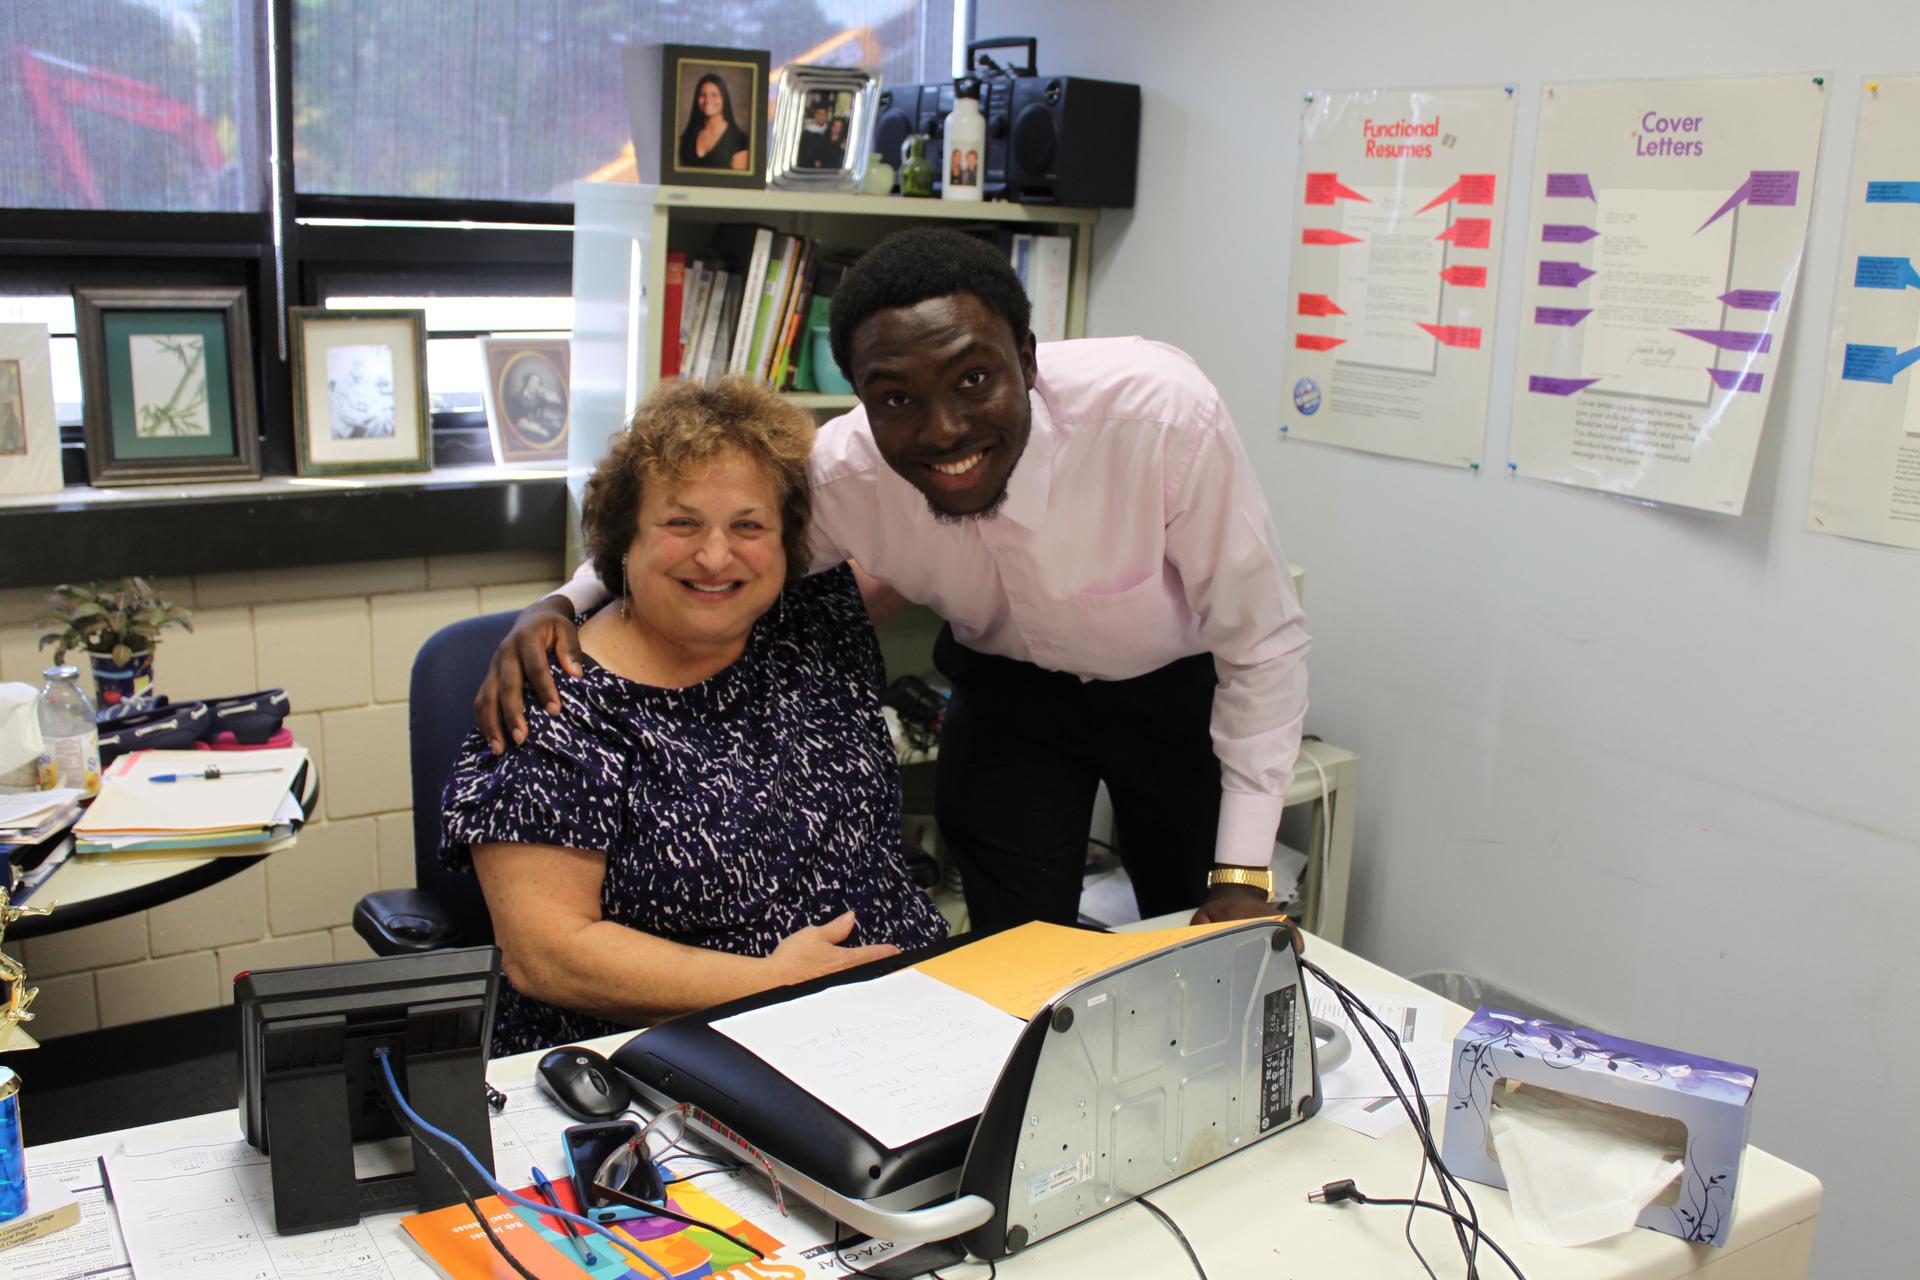 Ina Resnikoff, academic counsellor and learning specialist at North Shore Community College, with her student Osarumwense Agbonsalo, an immigrant from Nigeria